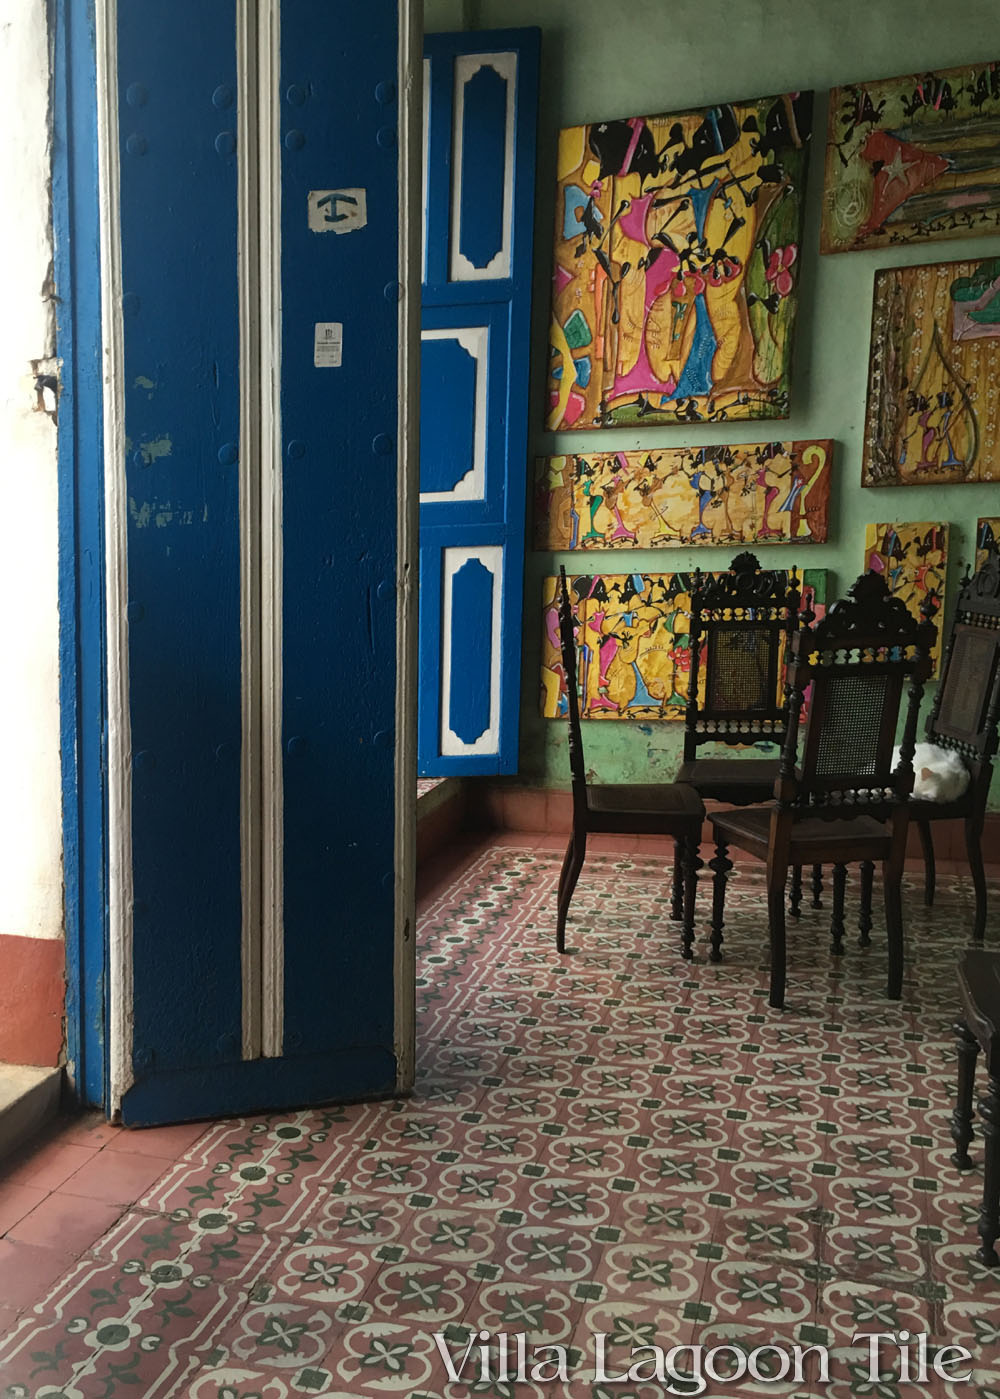 Art gallery in Havana with great tile floors because it was once a private home.